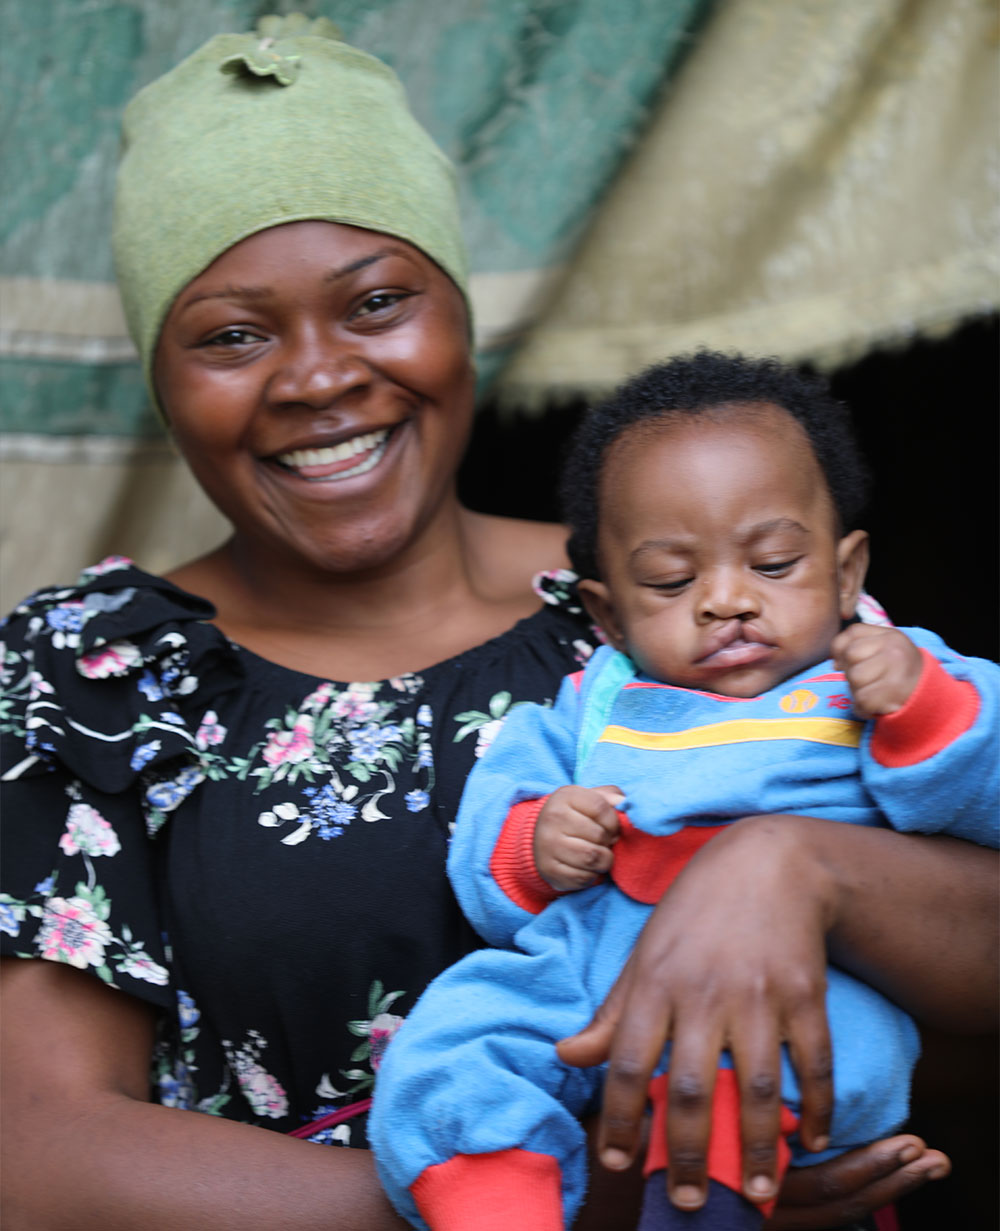 Mouhamed with his mother Rafiatou before cleft surgery